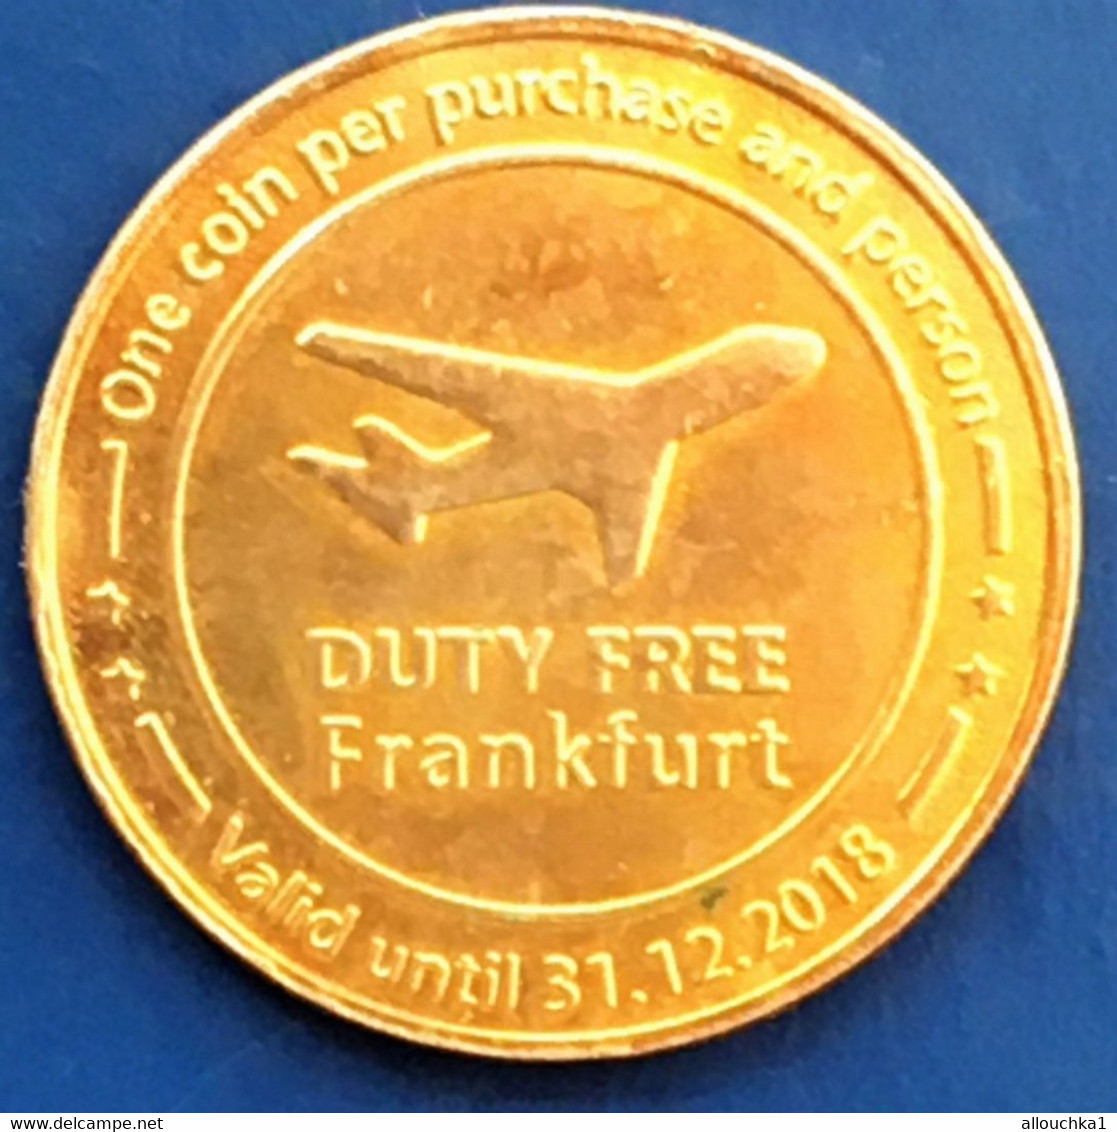 Exclusive At Frankfurt Airport-Frankfort Aéroport-Duty Free One Coin Per Purchase And Person-Valid Limit 31-12-2018--2€ - Firma's